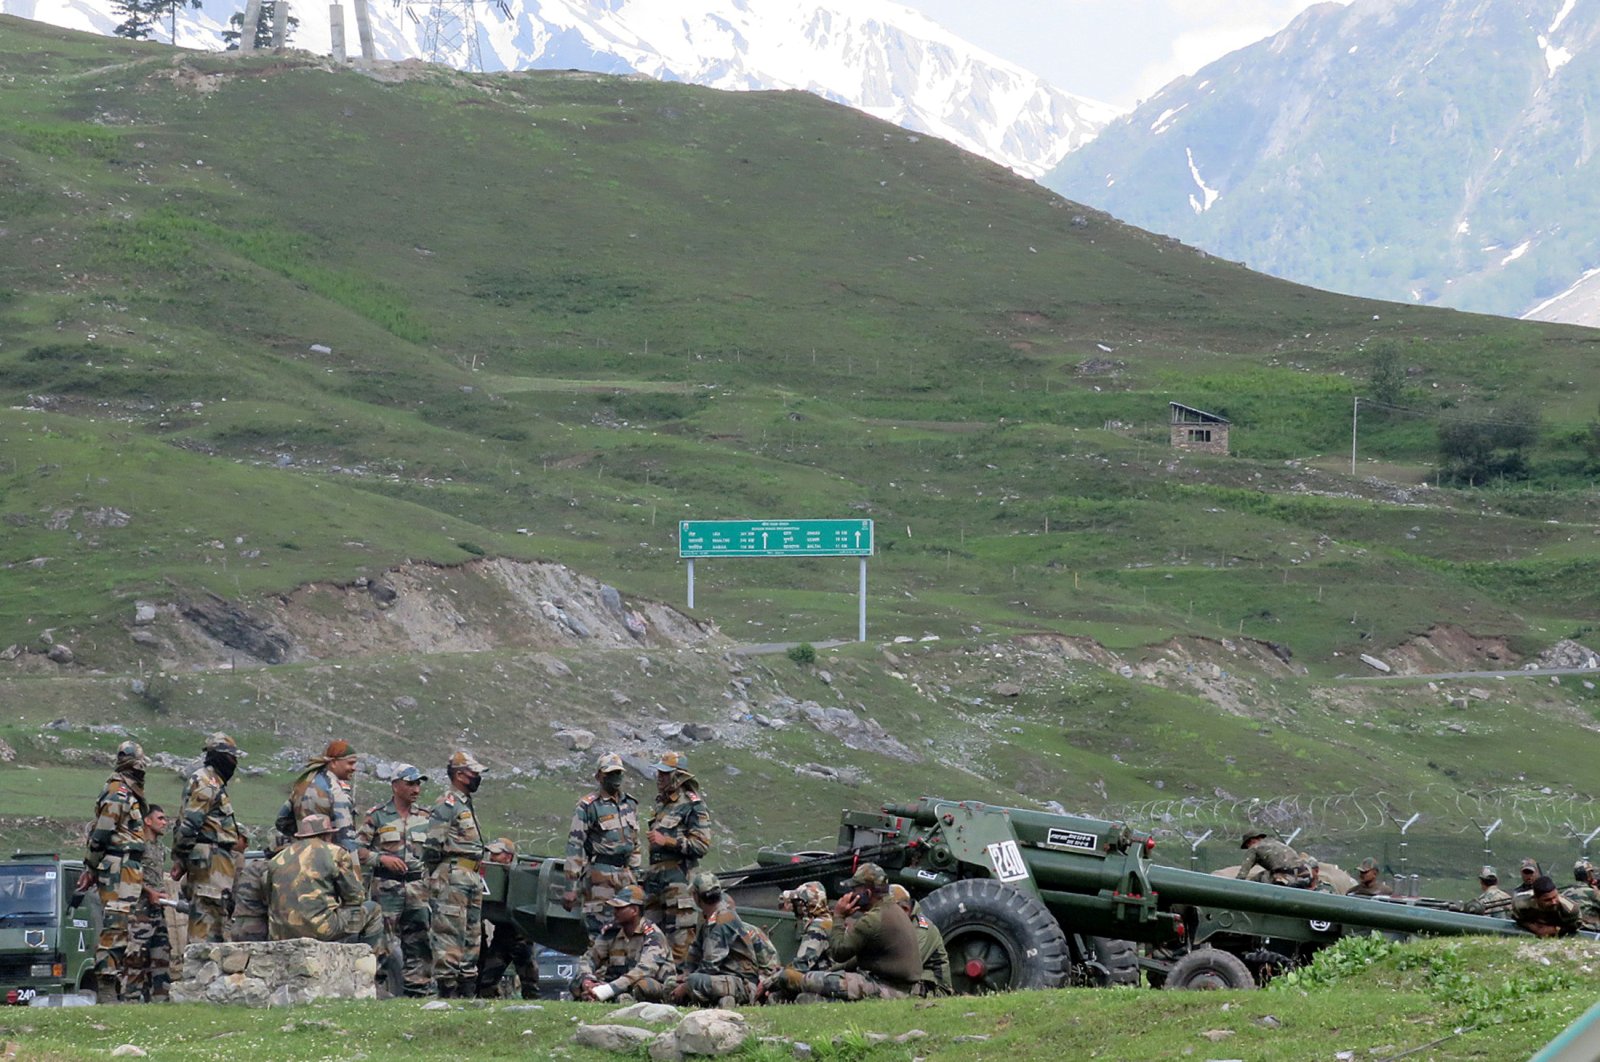 20 Indian soldiers killed in India-China border clash.